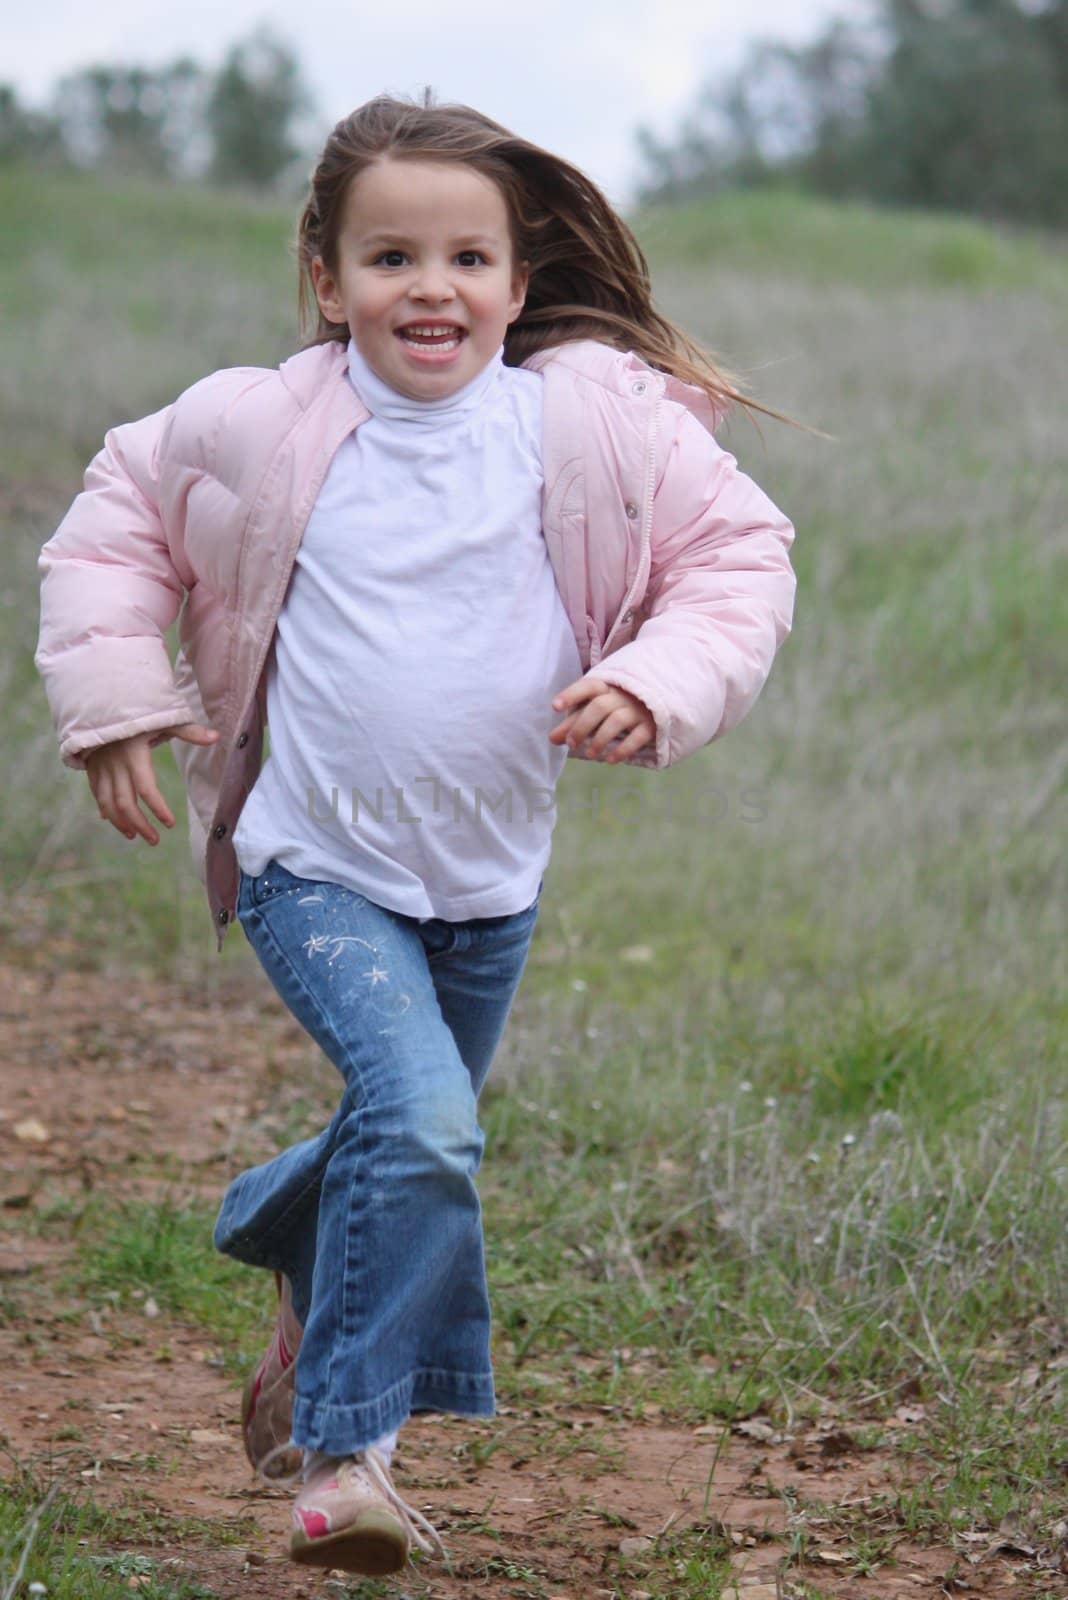 Young girl running on trail.